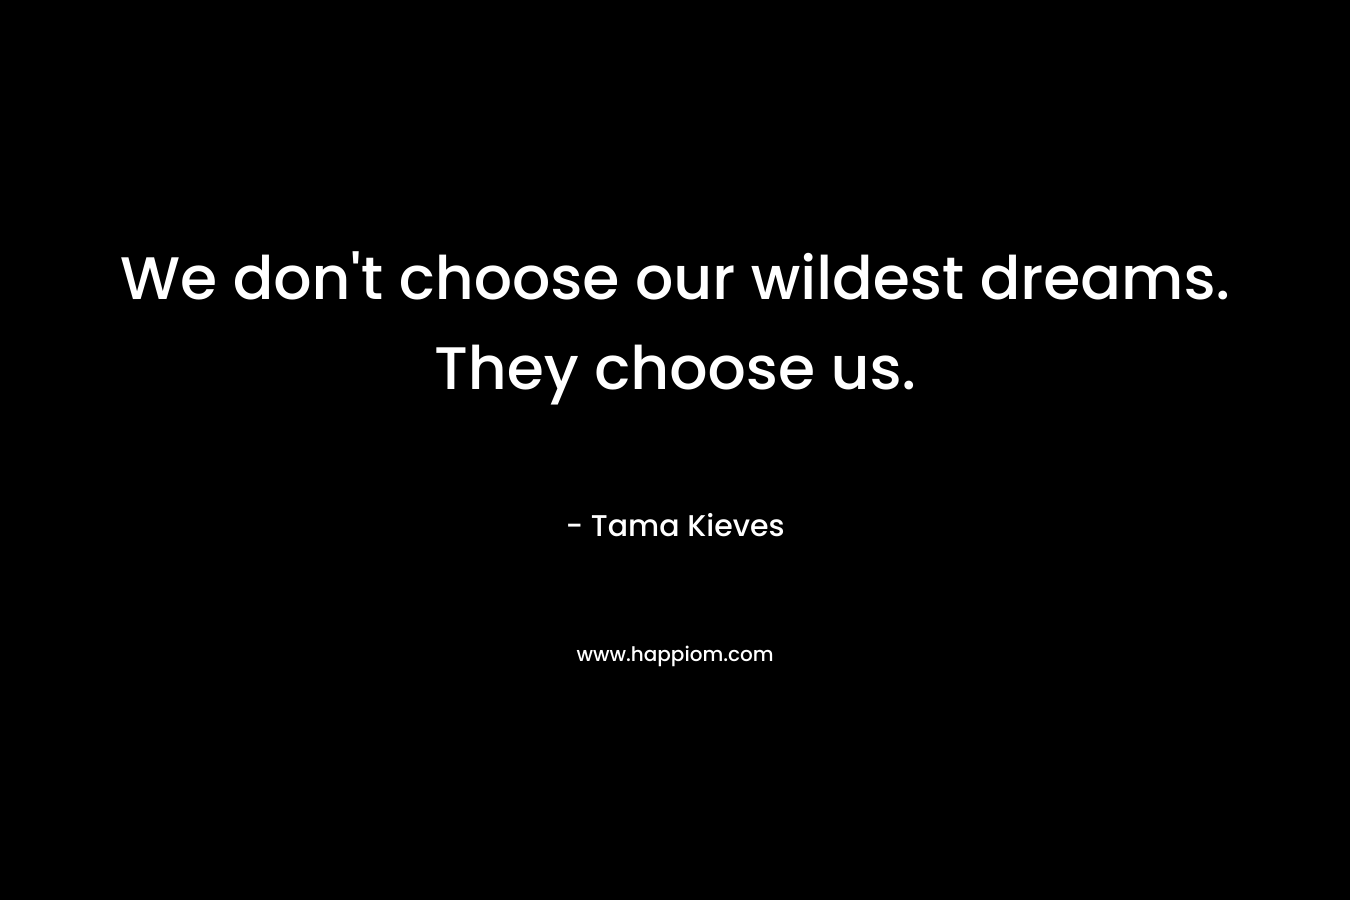 We don’t choose our wildest dreams. They choose us. – Tama Kieves